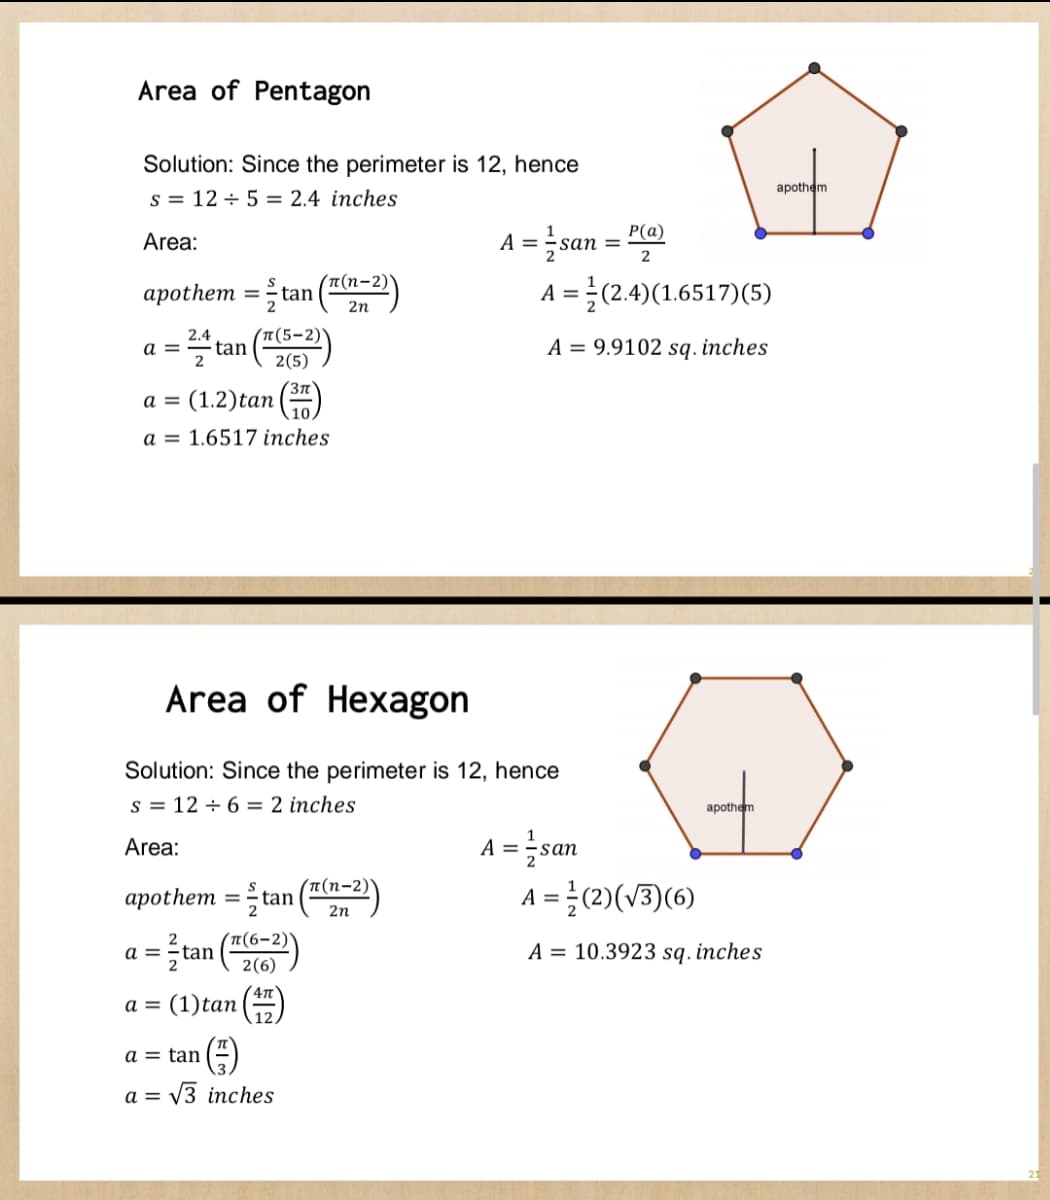 Area of Pentagon
Solution: Since the perimeter is 12, hence
S = 12 + 5 = 2.4 inches
Area:
apothem = tan ((2-2)
2.4
= 2/+tan (T(5-²))
a =
a = (1.2) tan
a = 1.6517 inches
a =
a = (1) tan
3T
Area of Hexagon
Solution: Since the perimeter is 12, hence
S = 12 + 6 = 2 inches
Area:
apothem = tan ((n=2))
= ²tan ((6-2))
4πT
a = tan
a = √3 inches
A = san =
=
P(a)
2
A = (2.4)(1.6517) (5)
A = 9.9102 sq. inches
A =
apothem
= 1/san
A = ²(2)(√3)(6)
A = 10.3923 sq. inches
apothem